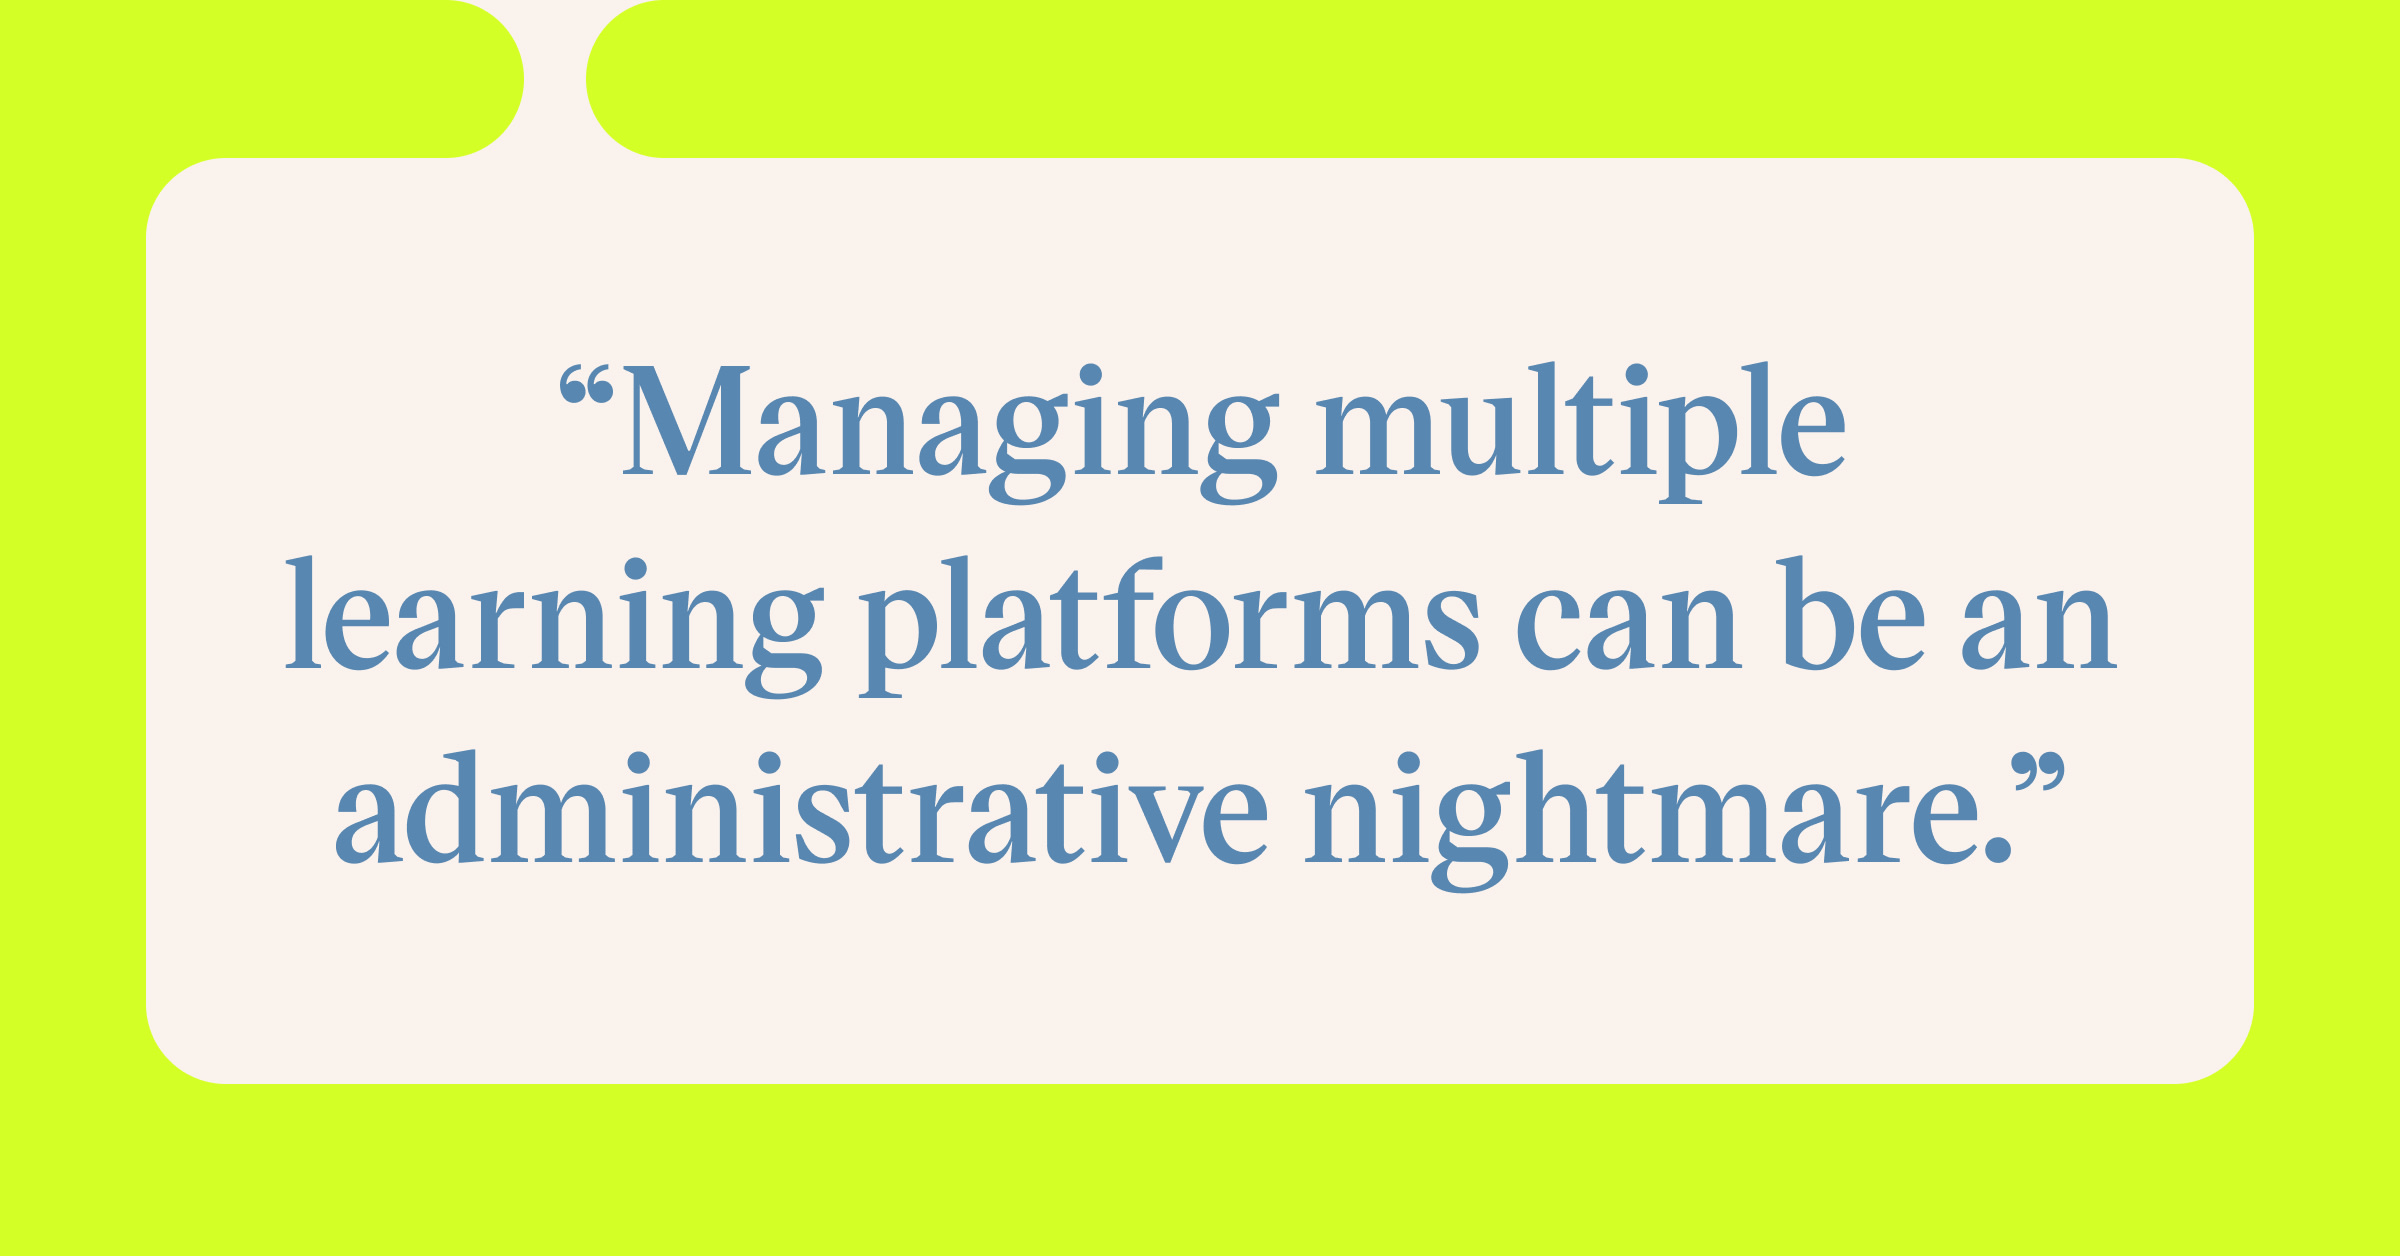 Pull quote with the text: Managing multiple learning platforms can be an administrative nightmare